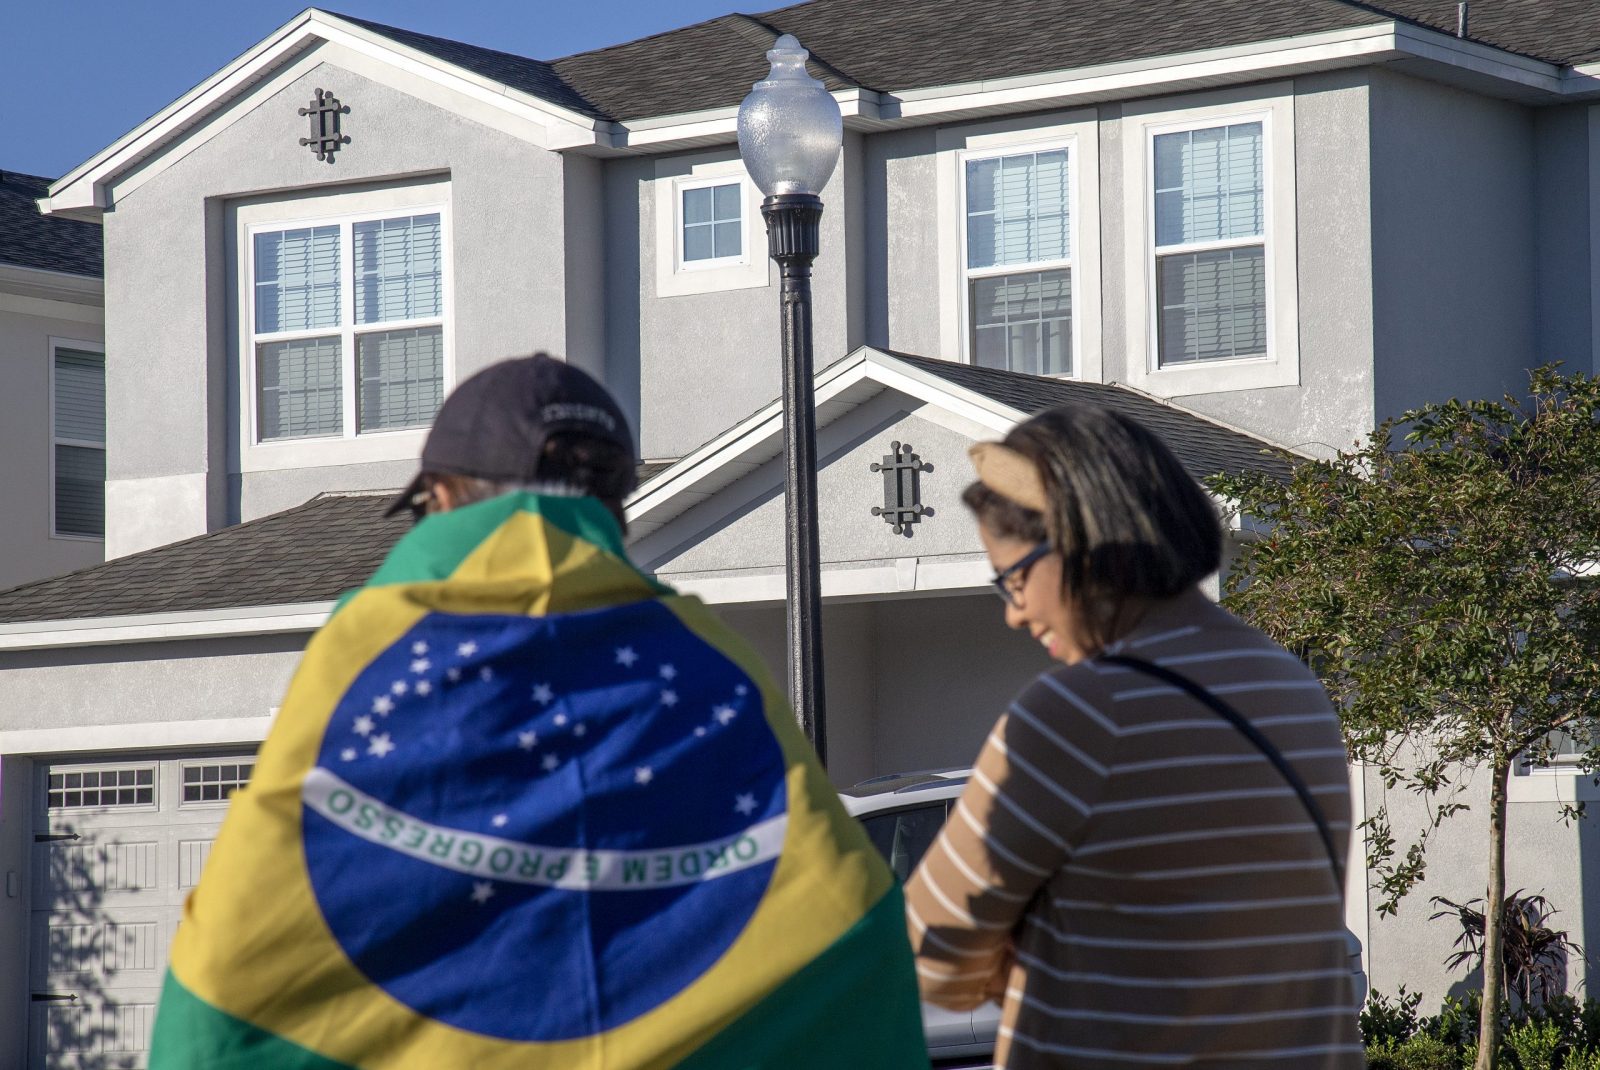 epa10401534 People stand in front of the house at the Encore Resort Homes, where former Brazil president Jair Bolsonaro is staying, in Reunion, Florida, USA, 12 January 2023. US Lawmakers called US President Joe Biden to extradite Bolsonaro back to his country from Florida. Bolsonaro has been staying in Central Florida, near Orlando, as his supporters protest in Brazil.  EPA/CRISTOBAL HERRERA-ULASHKEVICH